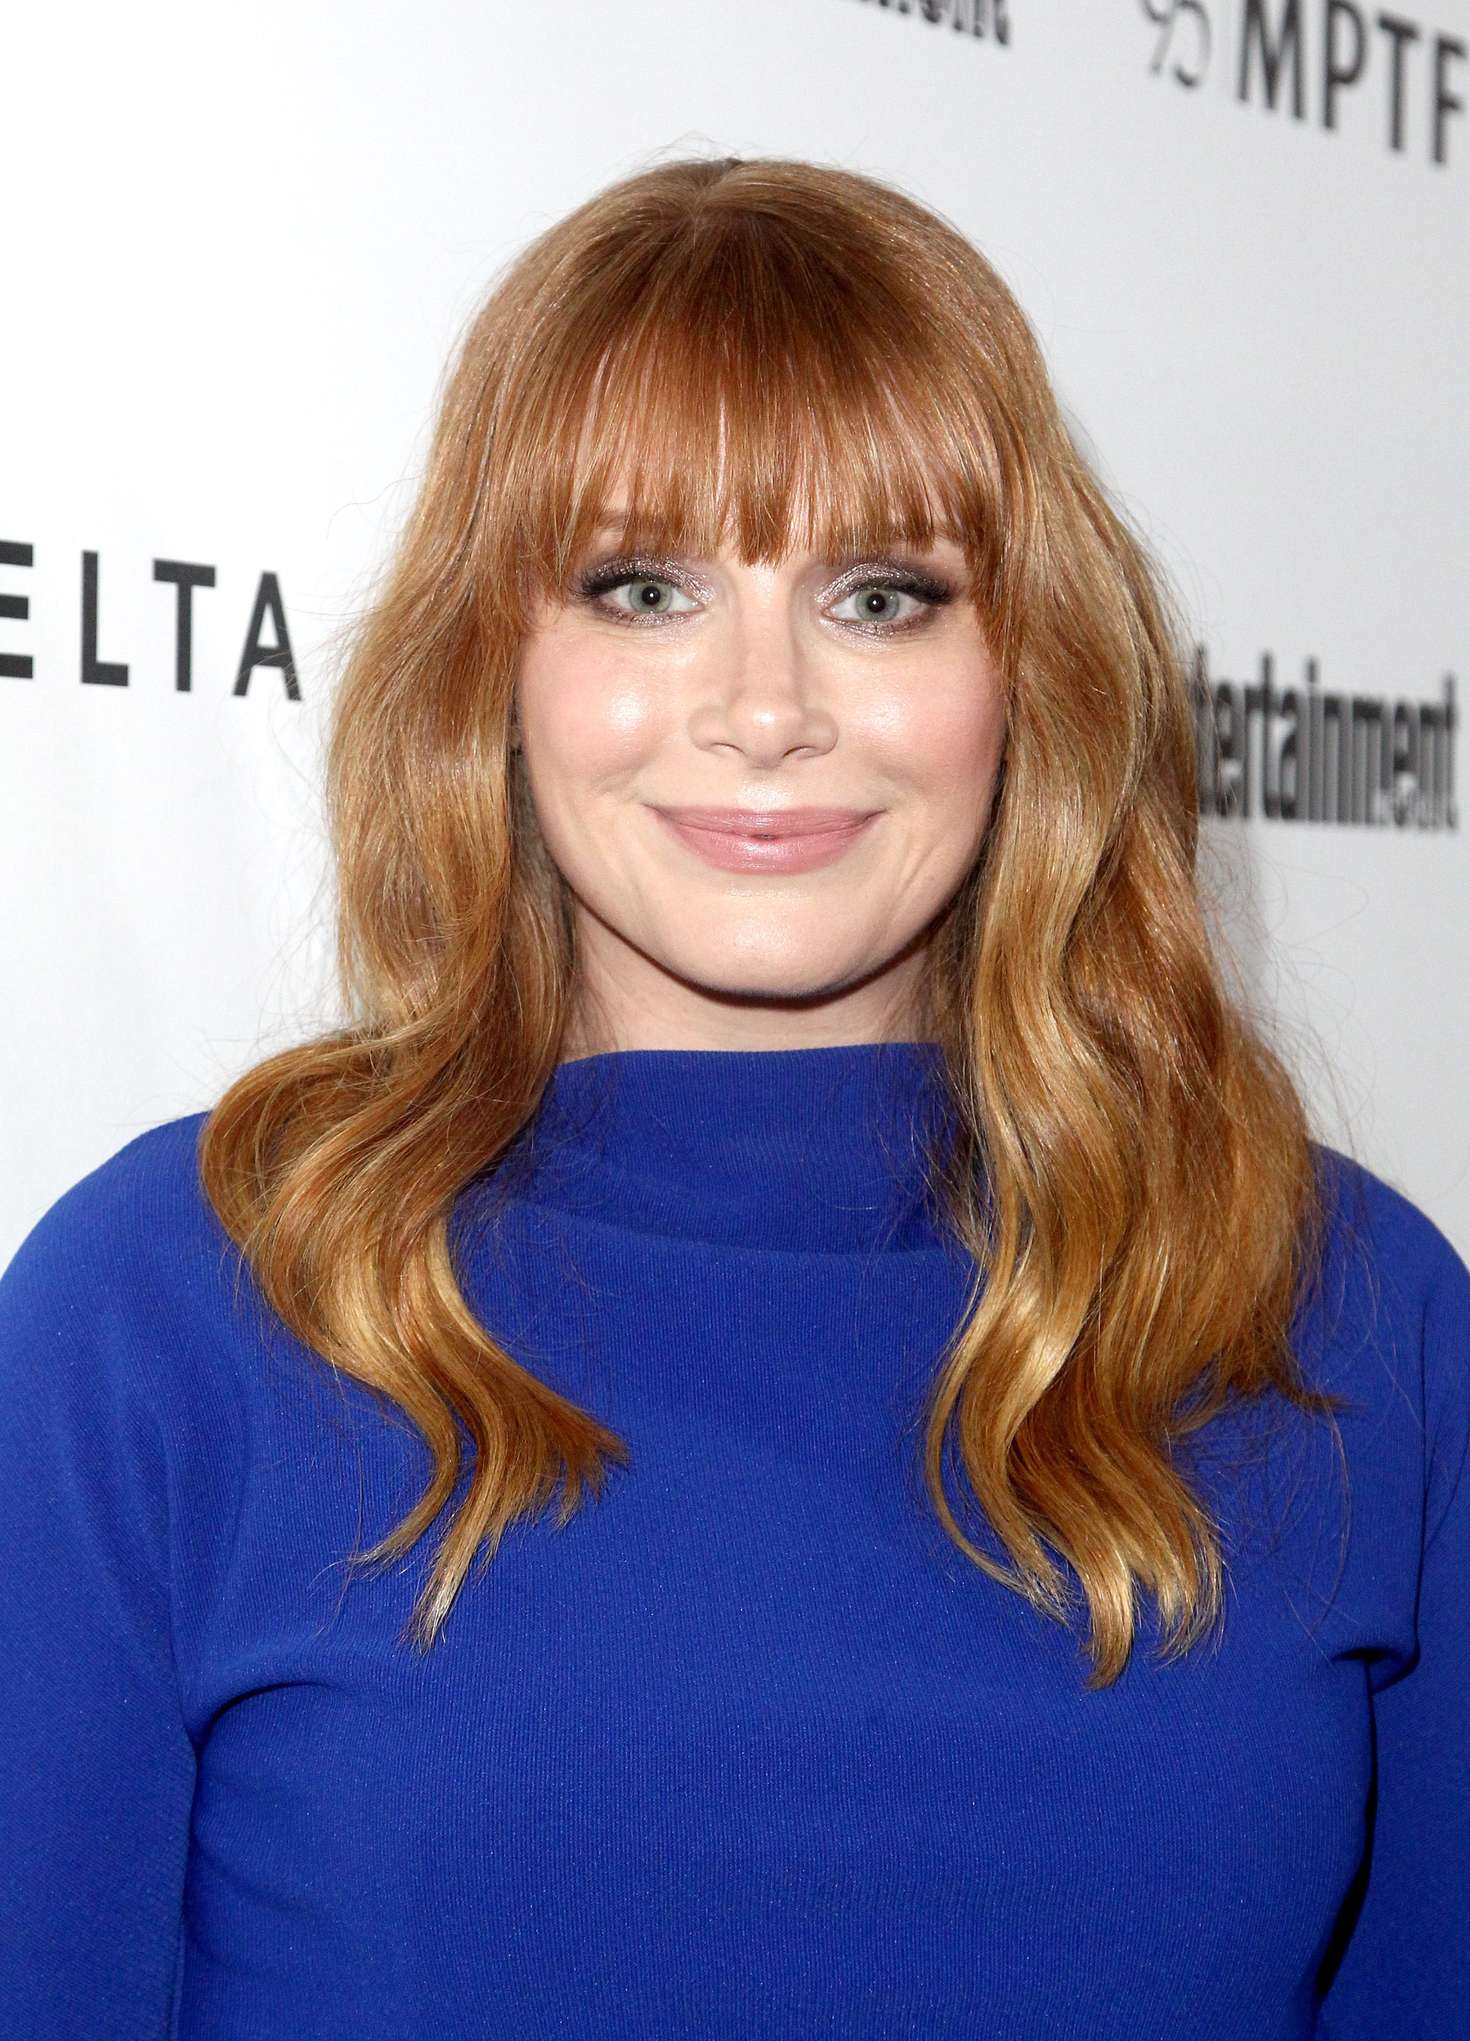 Bryce Dallas Howard â€“ 5th Annual Reel Stories Real Lives Event in Hollywood